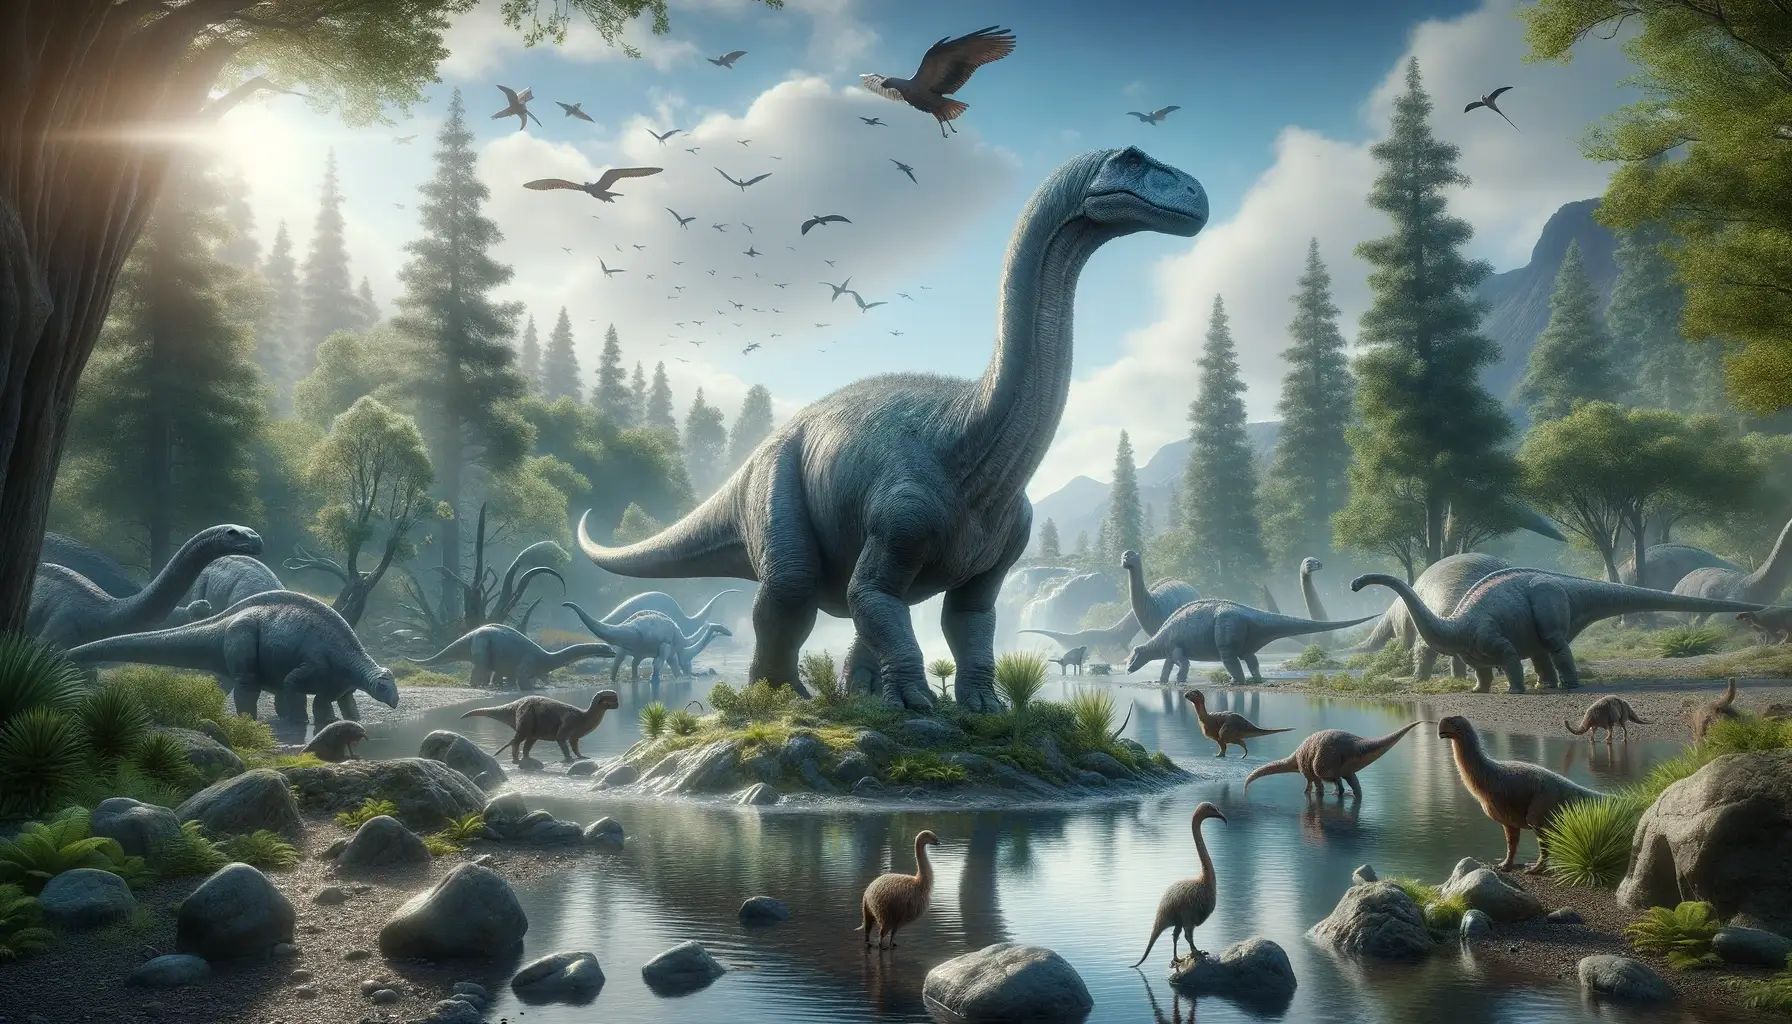 Antarctosaurus roaming in Late Cretaceous environment with trees and ferns.